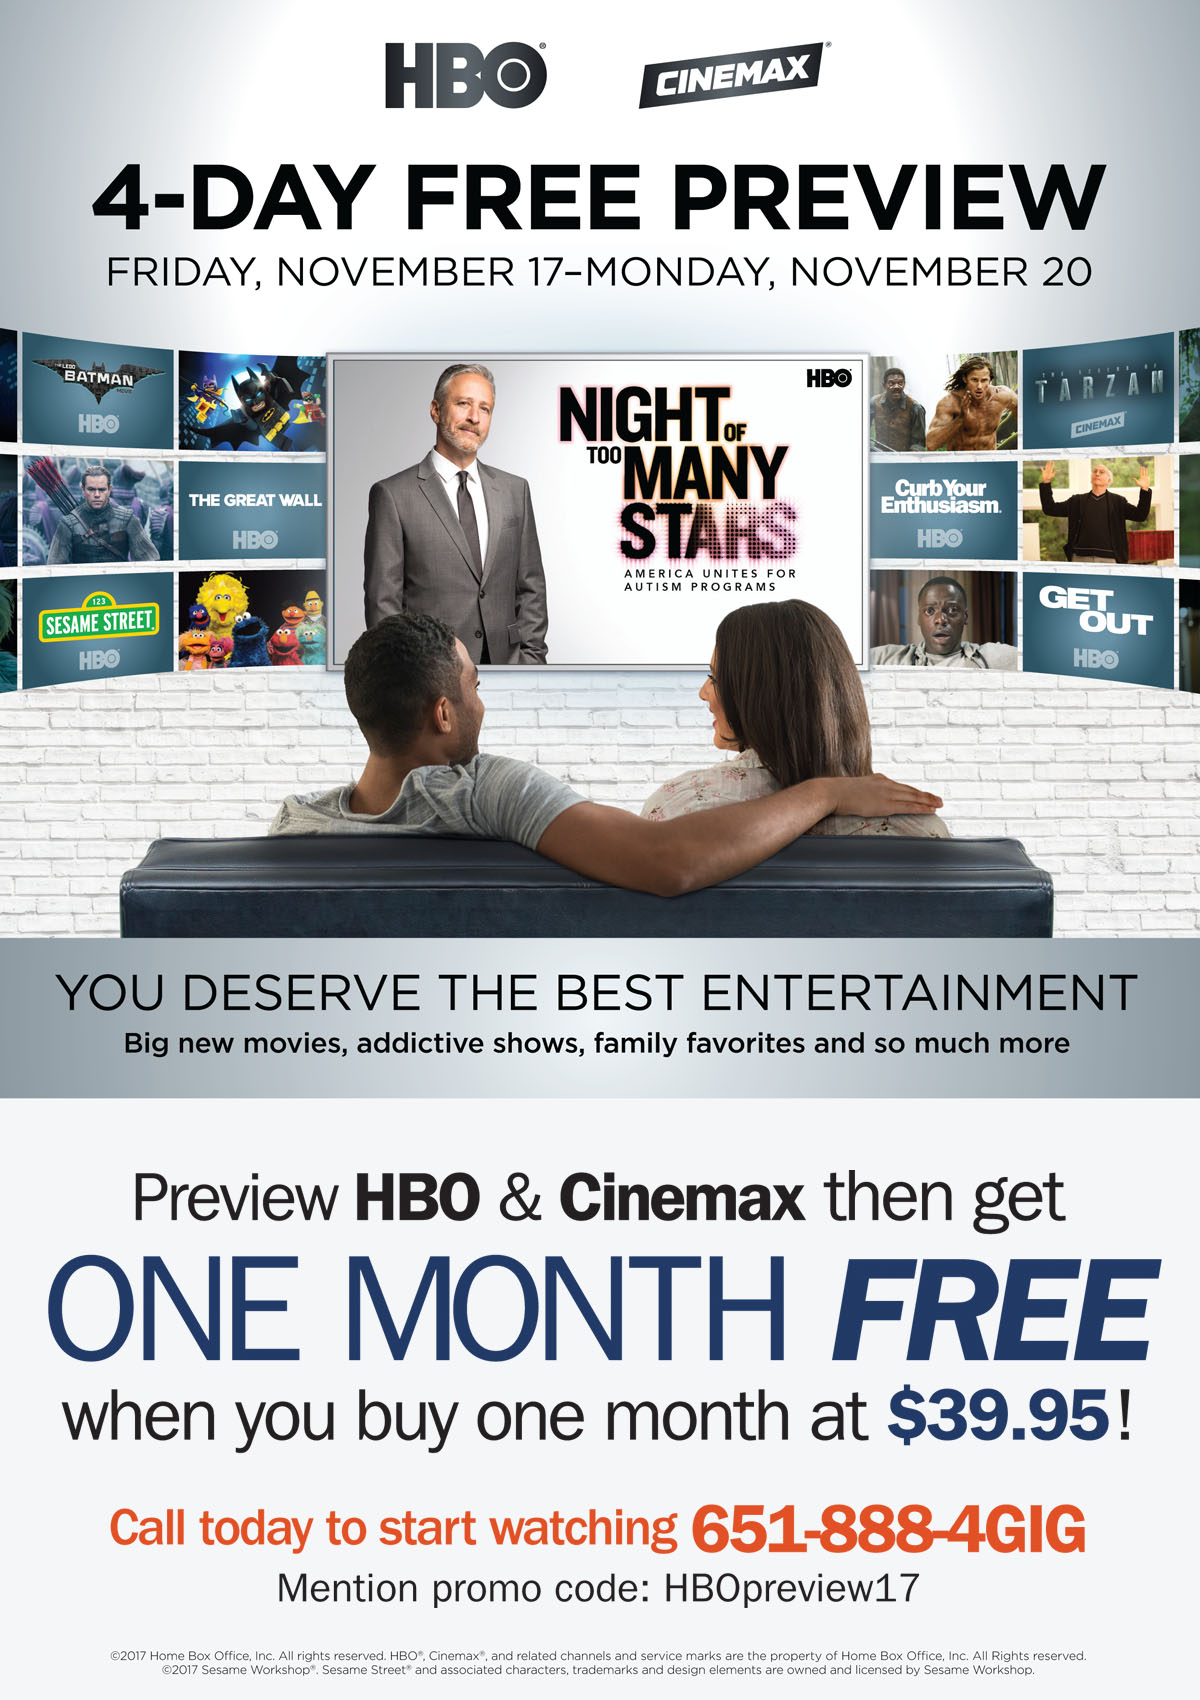 HBO/Cinemax Free Preview - One Free Month Promo